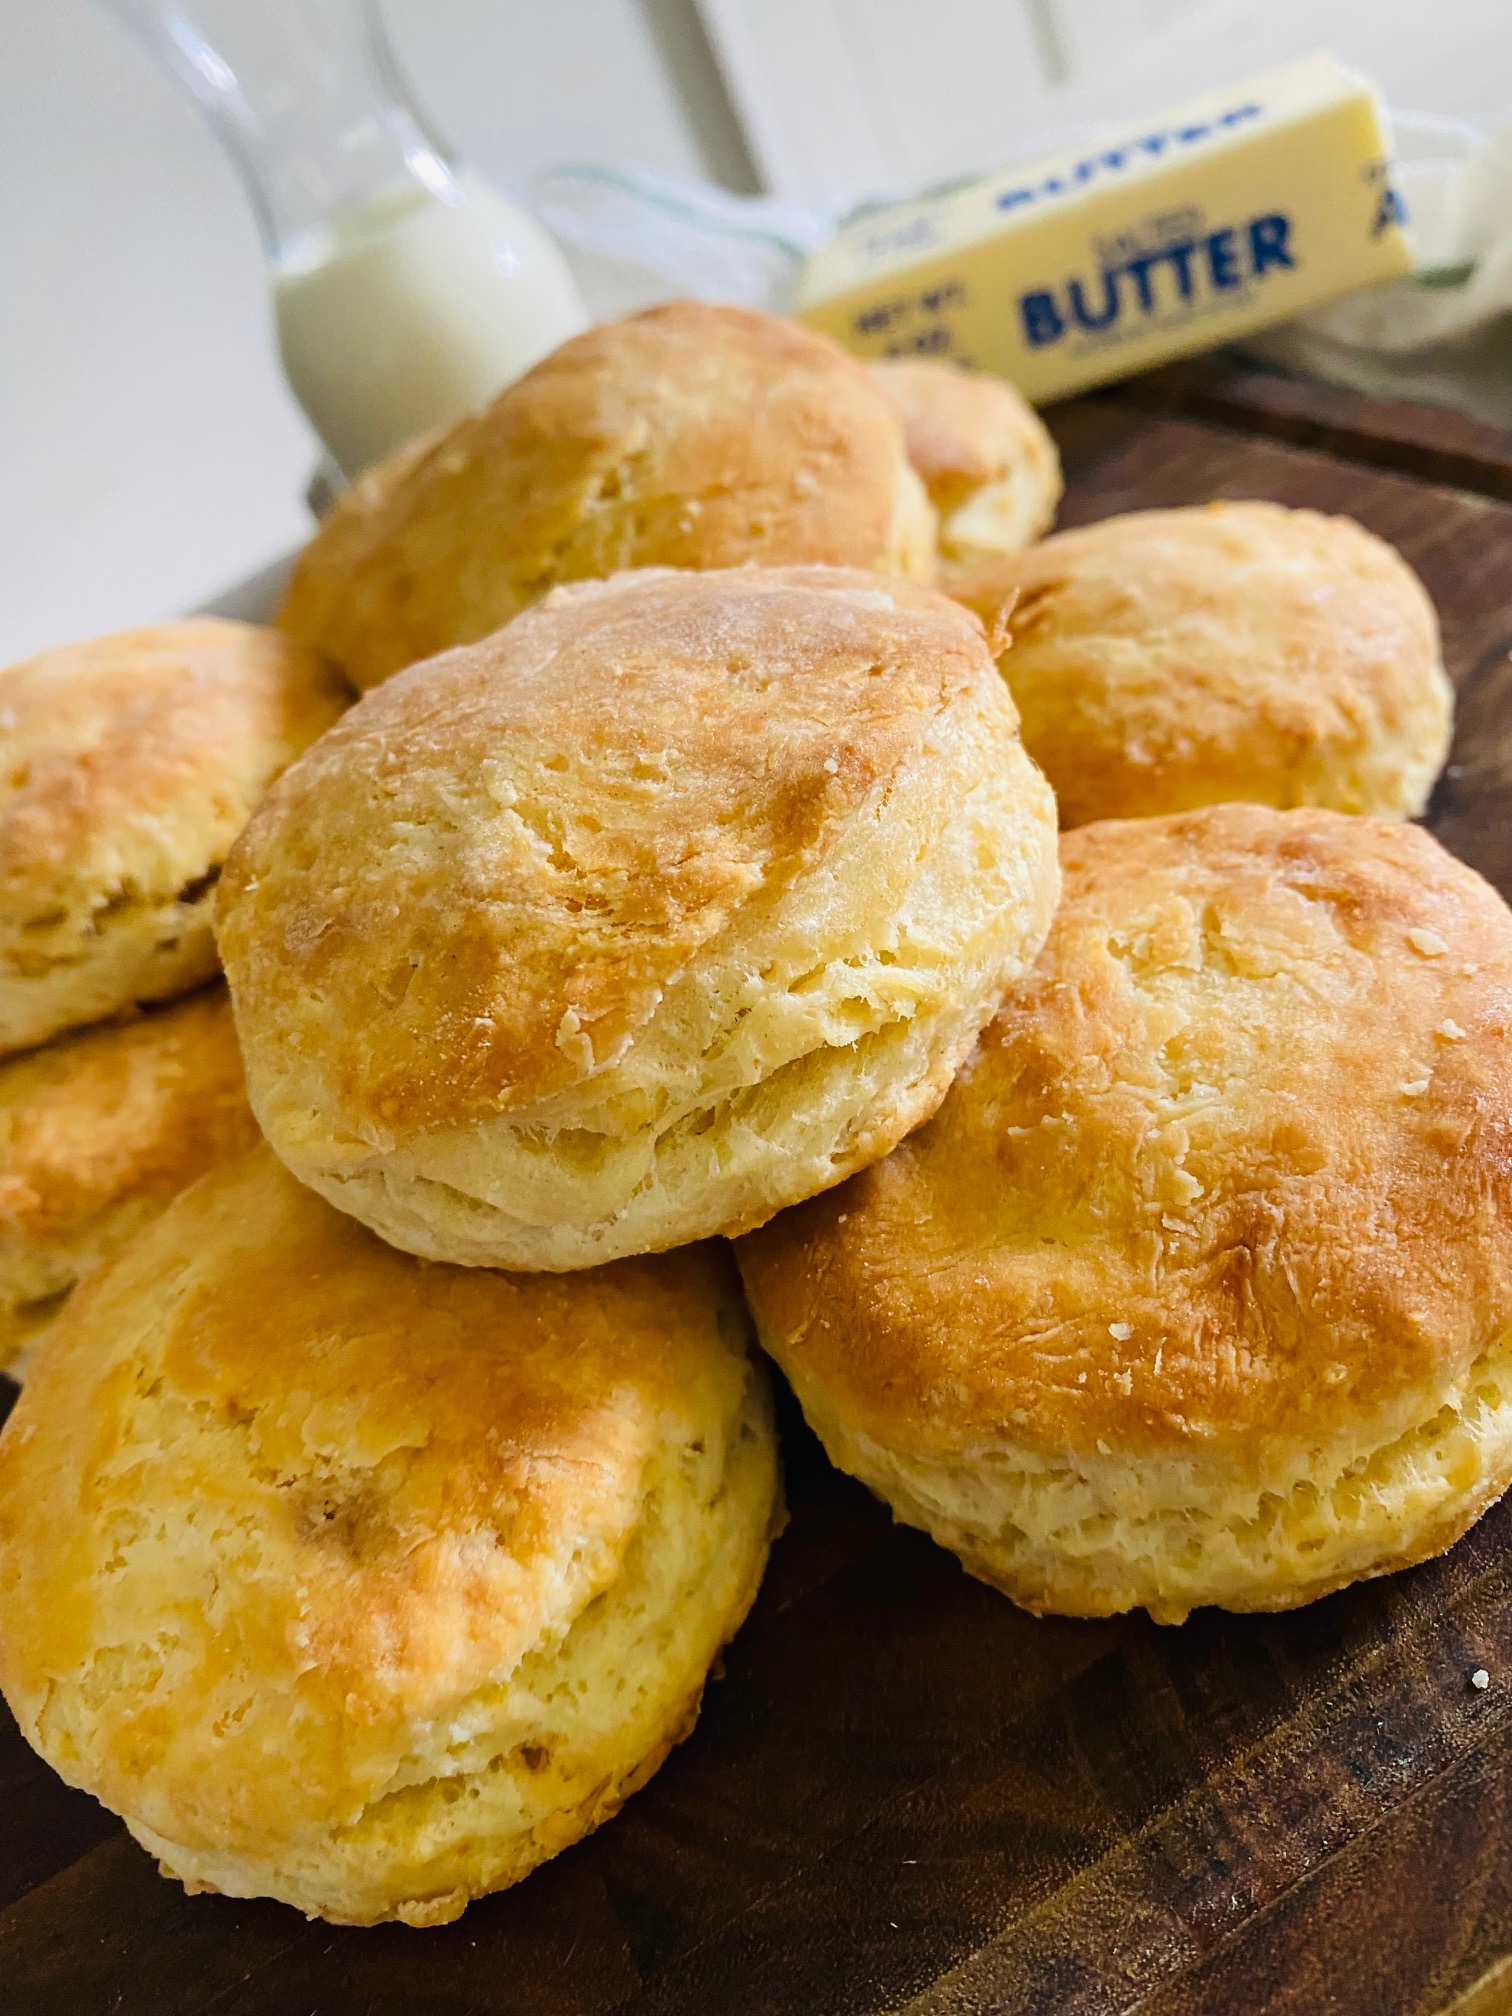 A pile of flaky, golden buttermilk biscuits on a dark colored wood curring board with a container of buttermilk and a stick of butter in the background.